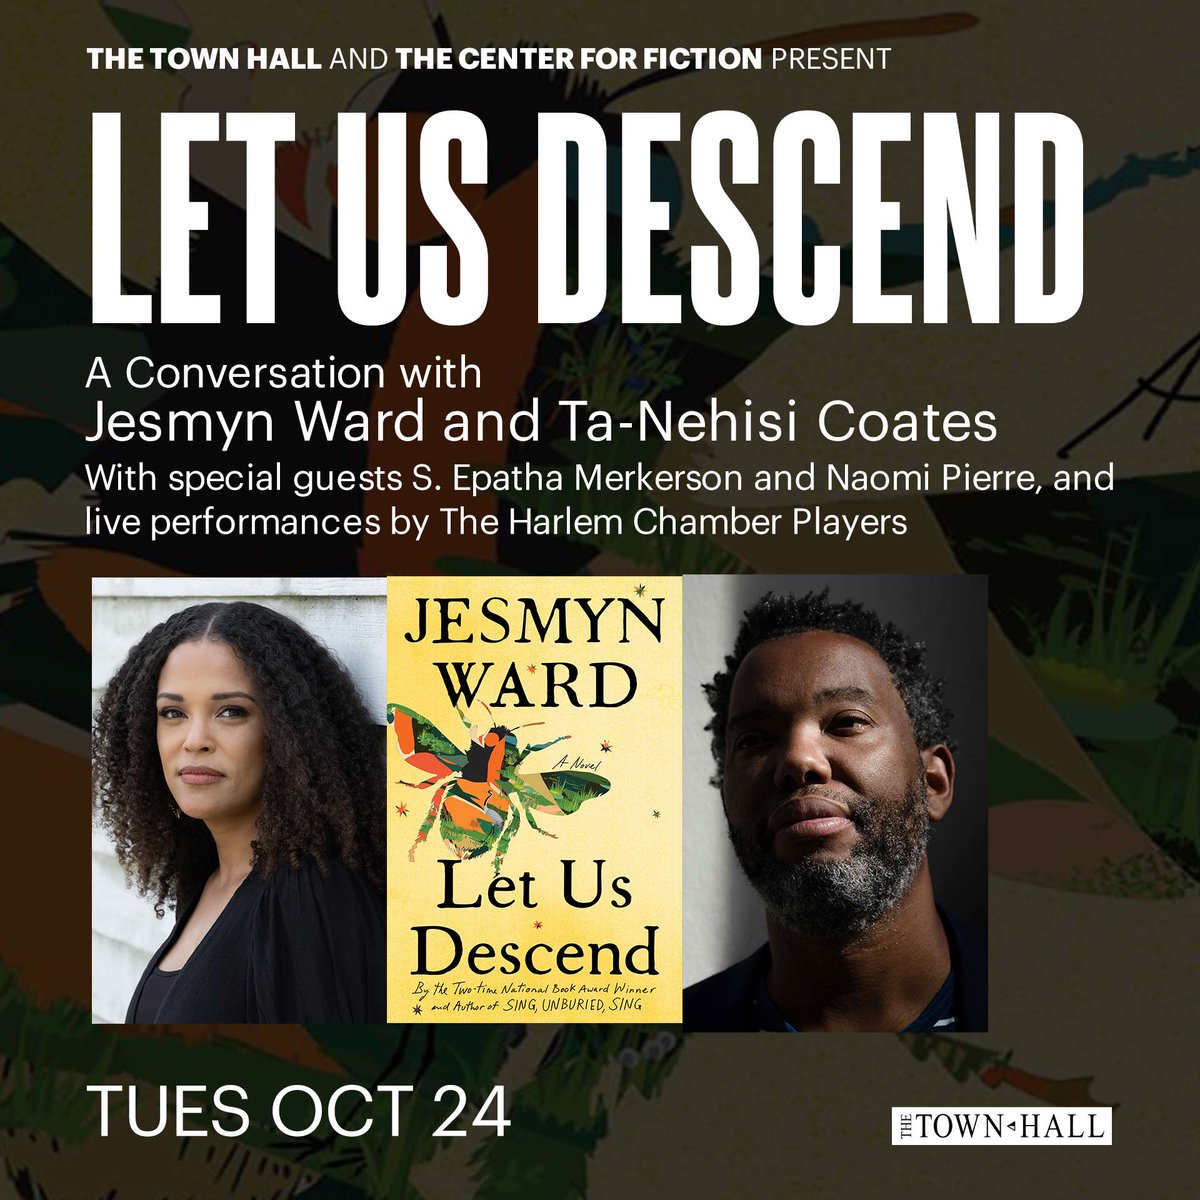 Tue, Oct 24, Jesmyn Ward & Ta-Nehisi Coates, meet on the historic stage of The Town Hall to celebrate the release of Ward's novel, Let Us Descend. W/ S. Epatha Merkerson, Naomi Pierre, & The Harlem Chamber Players. All tix include a copy of the book Tix: bit.ly/WardTH